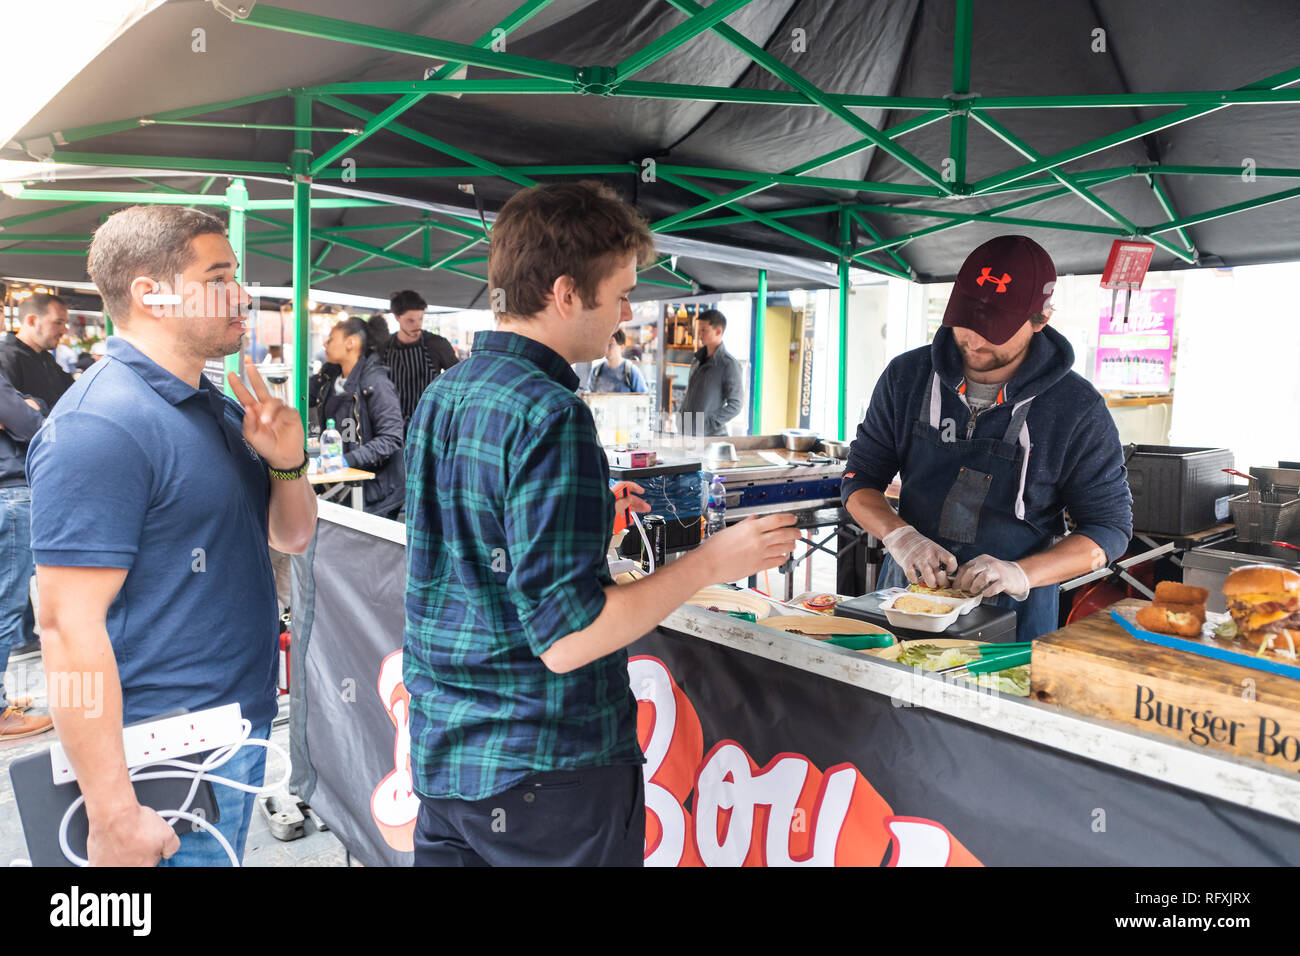 London, UK - September 12, 2018: Famous Brewer Market Street with Soho food stall and vendor outside and people ordering fresh burgers with sign Stock Photo